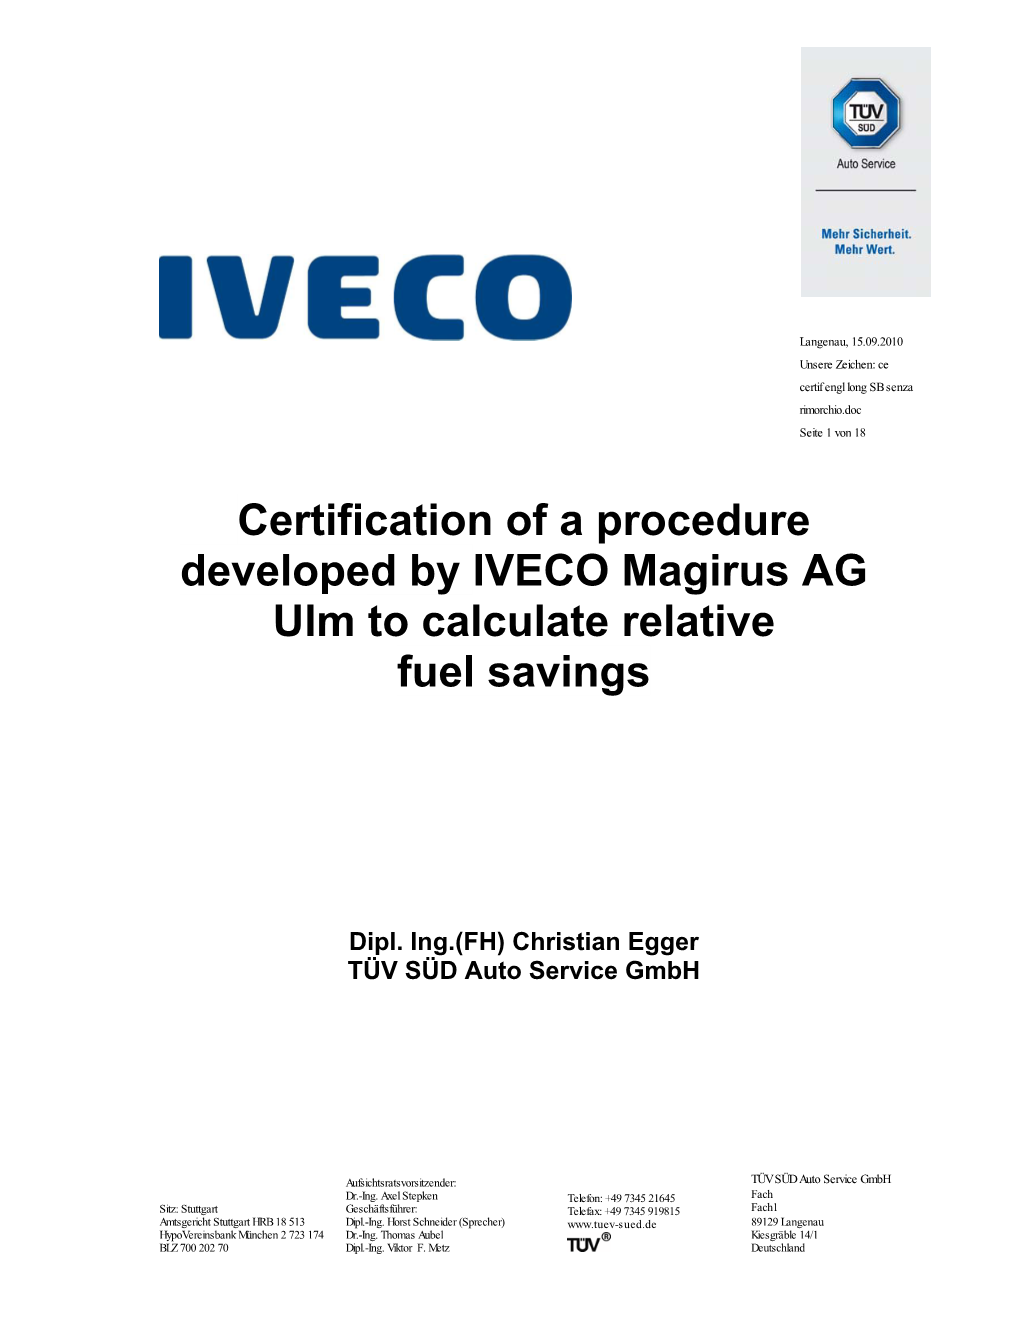 Certification of a Procedure Developed by IVECO Magirus AG Ulm to Calculate Relative Fuel Savings